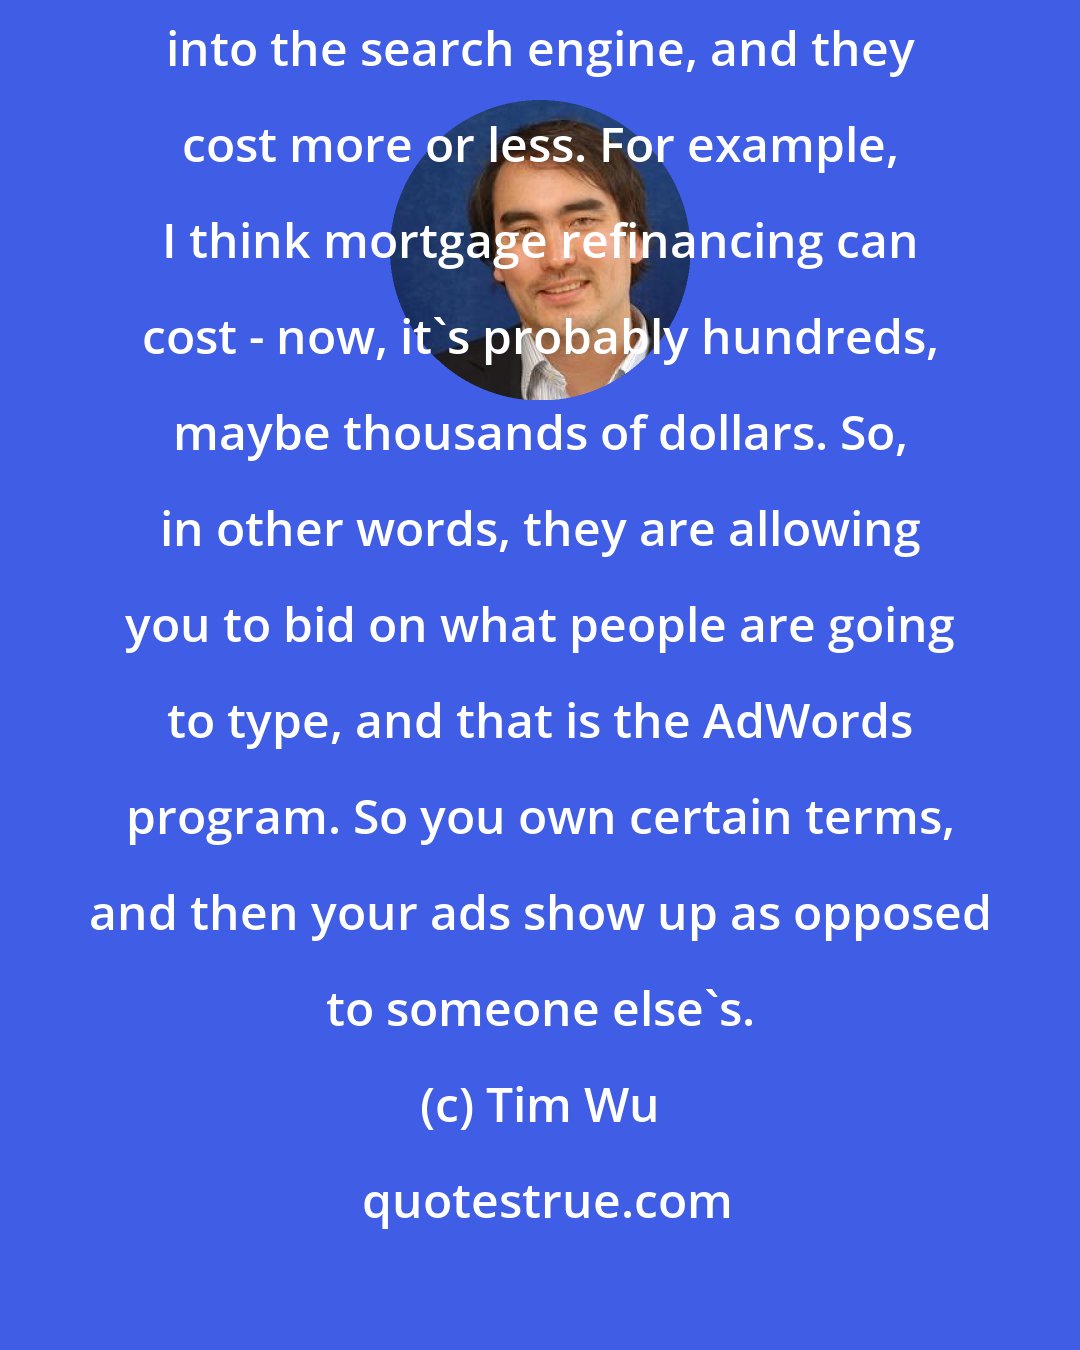 Tim Wu: Google's AdWords, they allow you to bid on words that people will type into the search engine, and they cost more or less. For example, I think mortgage refinancing can cost - now, it's probably hundreds, maybe thousands of dollars. So, in other words, they are allowing you to bid on what people are going to type, and that is the AdWords program. So you own certain terms, and then your ads show up as opposed to someone else's.